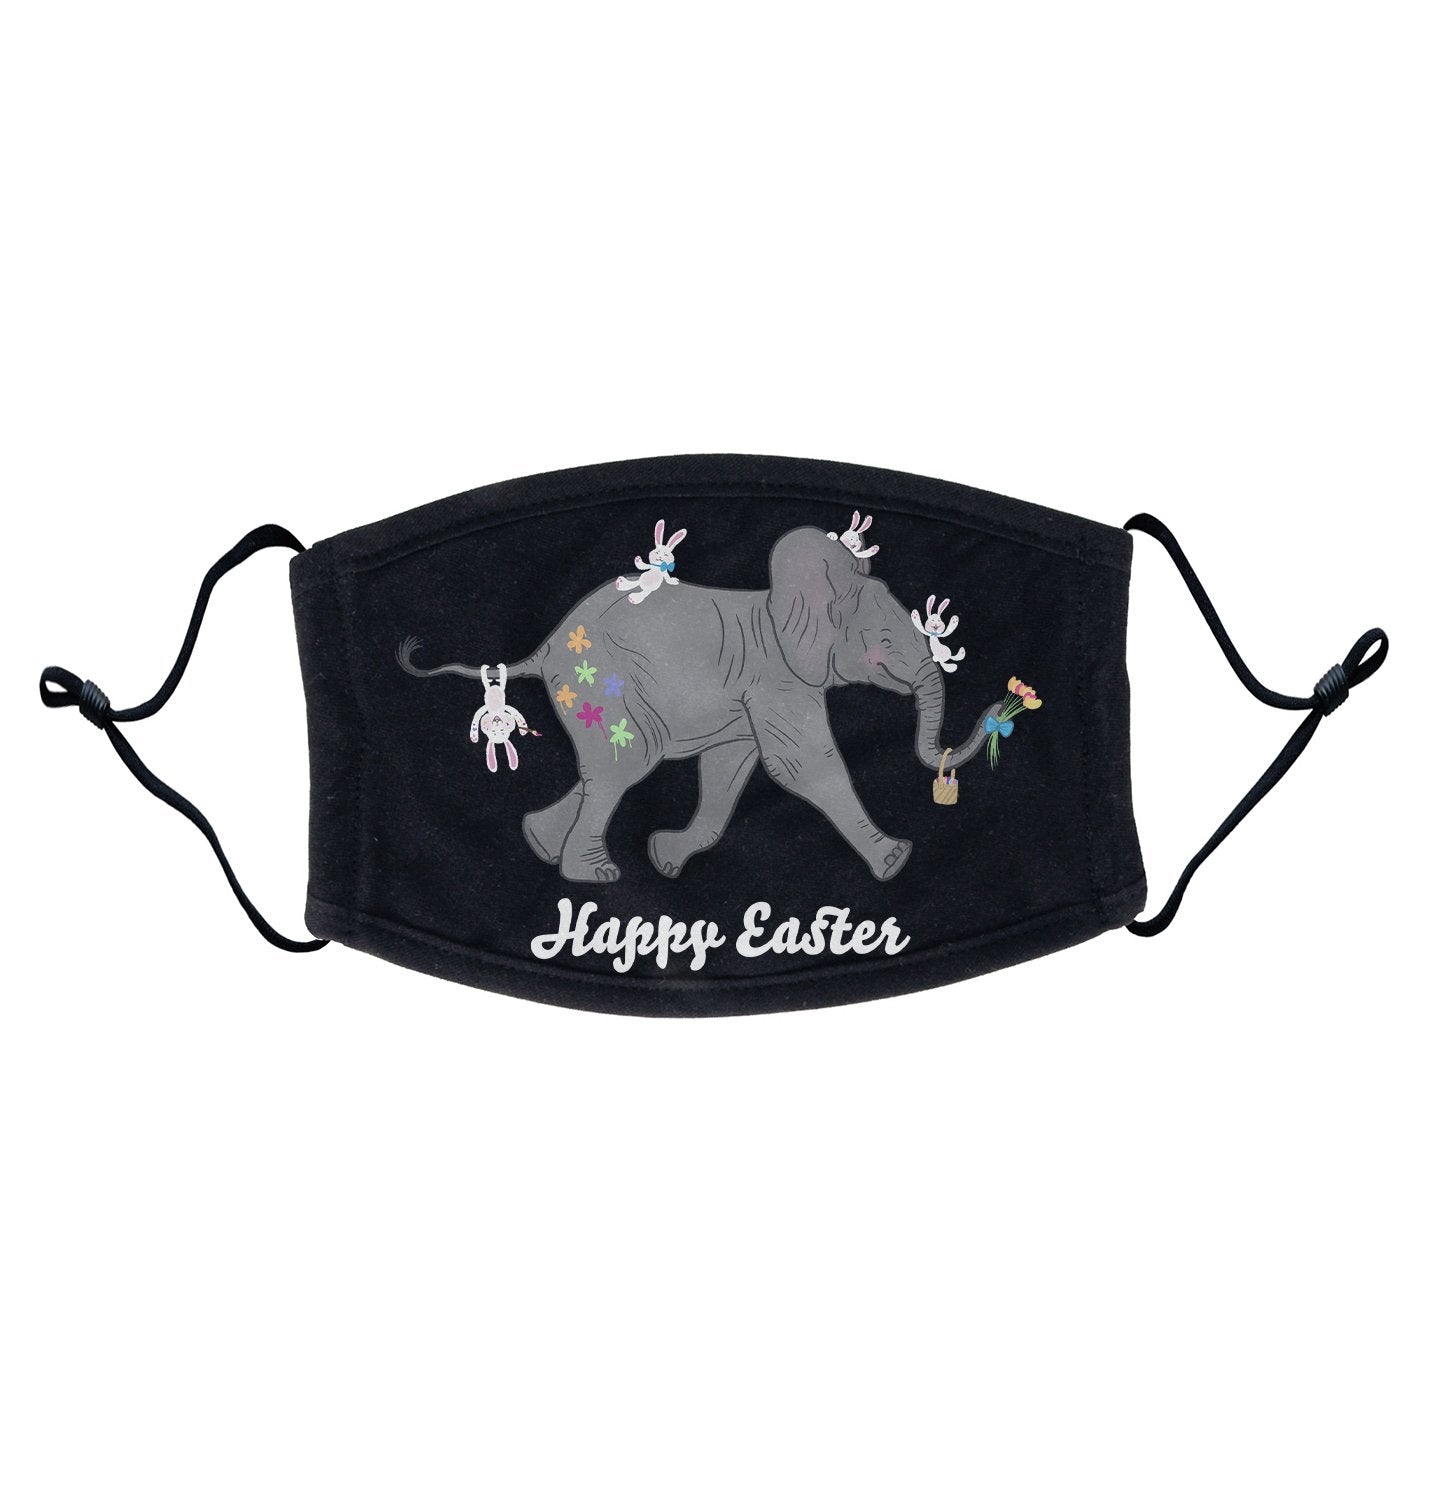 Animal Pride - Easter Baby Elephant and Friends  - Adult Adjustable Face Mask